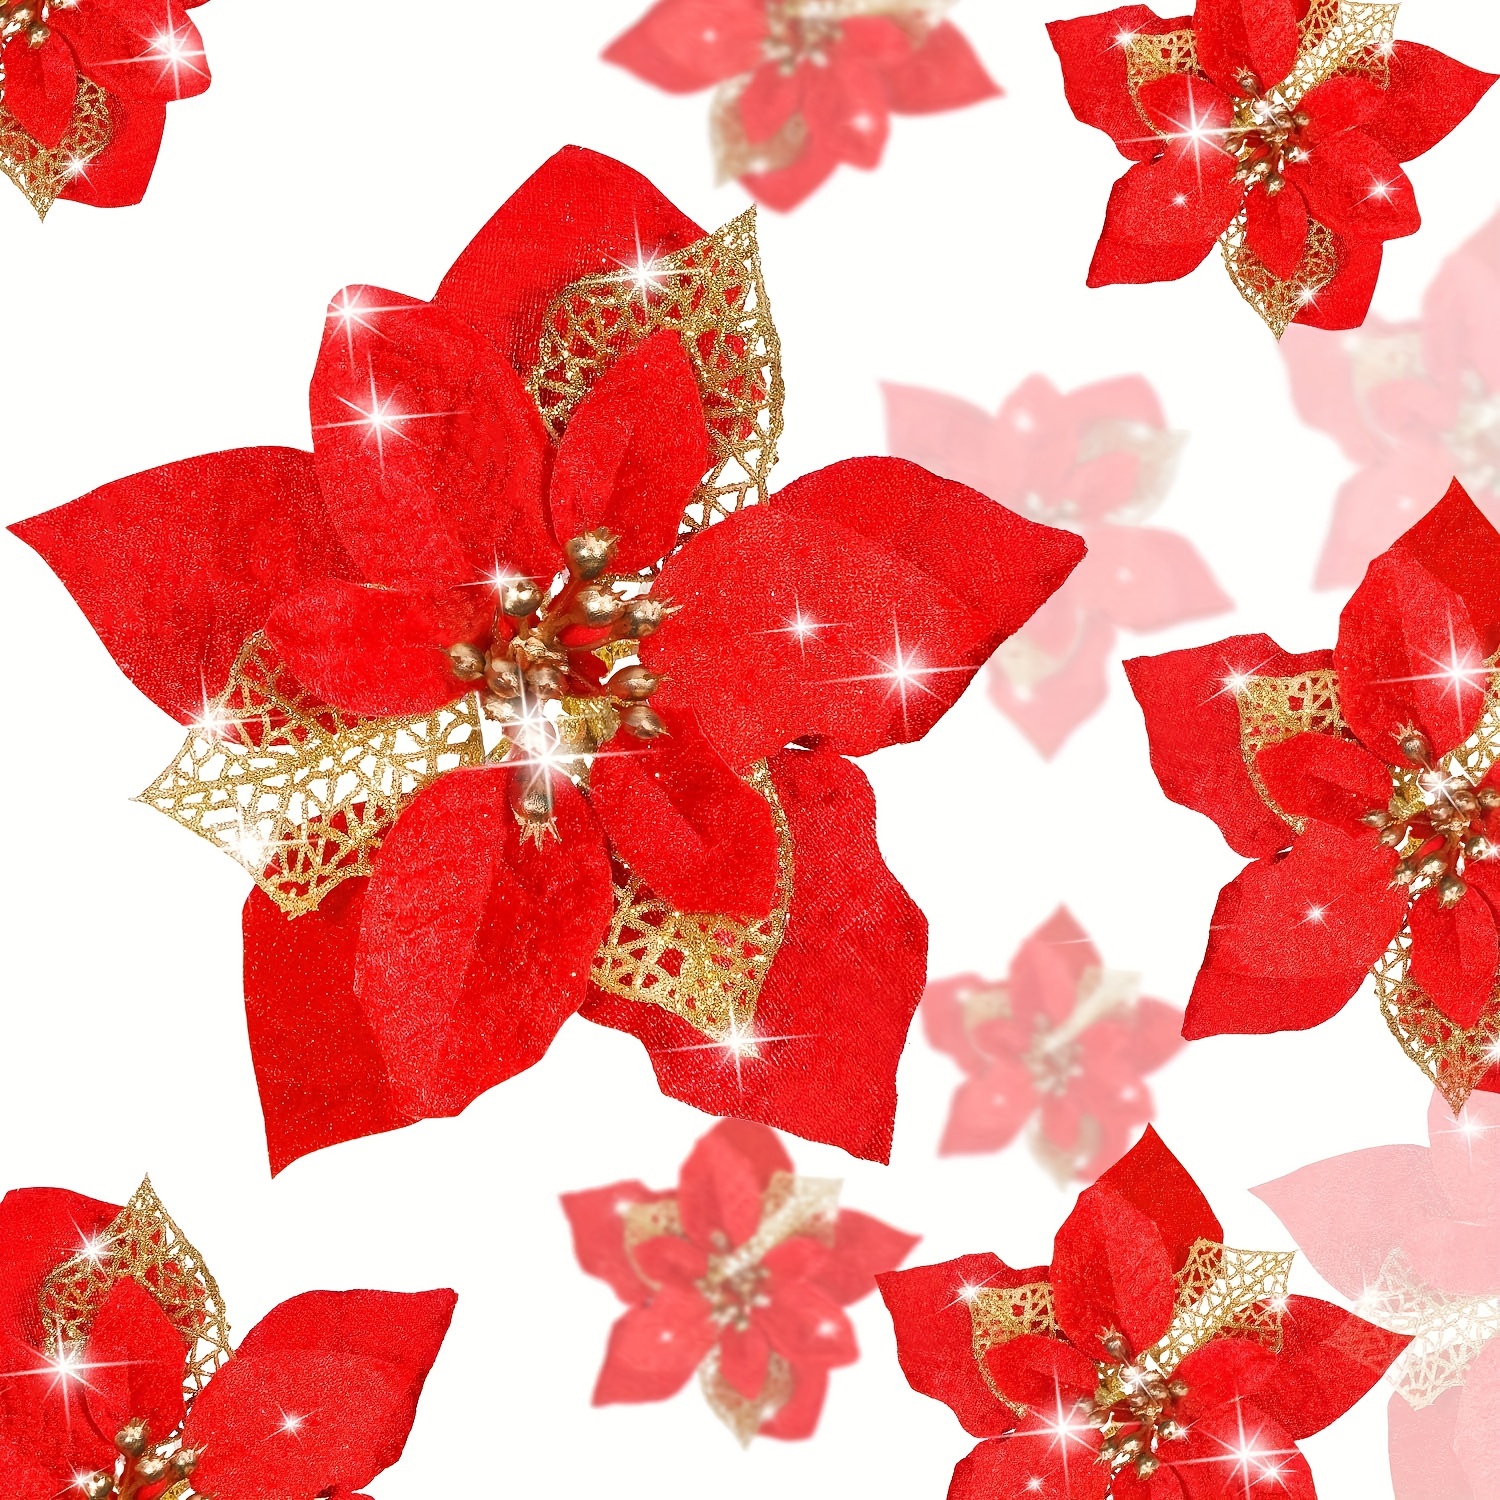 

15pcs Christmas Tree Decorations Poinsettias Artificial Flowers Ornament Large Size 8.7xmas Red Or White Glitter Flower With Clips